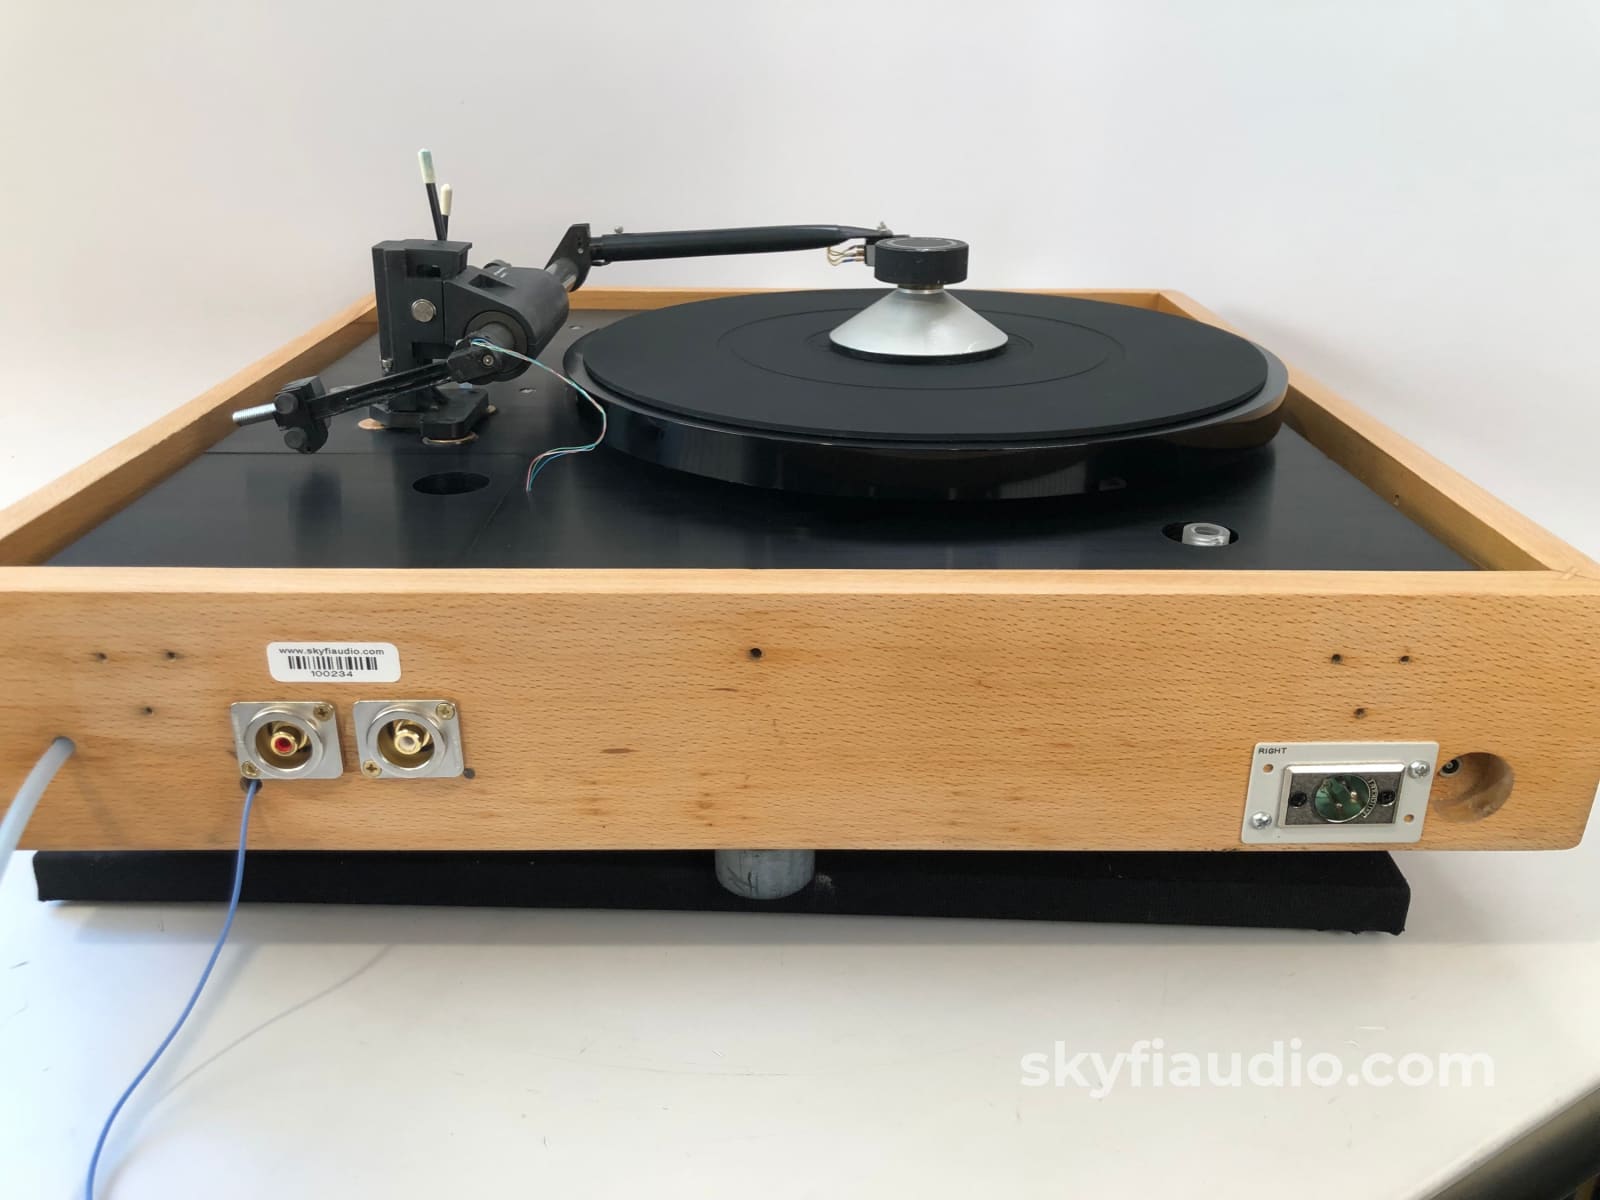 Goldmund Studio Turntable With Eminent Technologies Linear Air Bearing Arm And Grado Cartridge